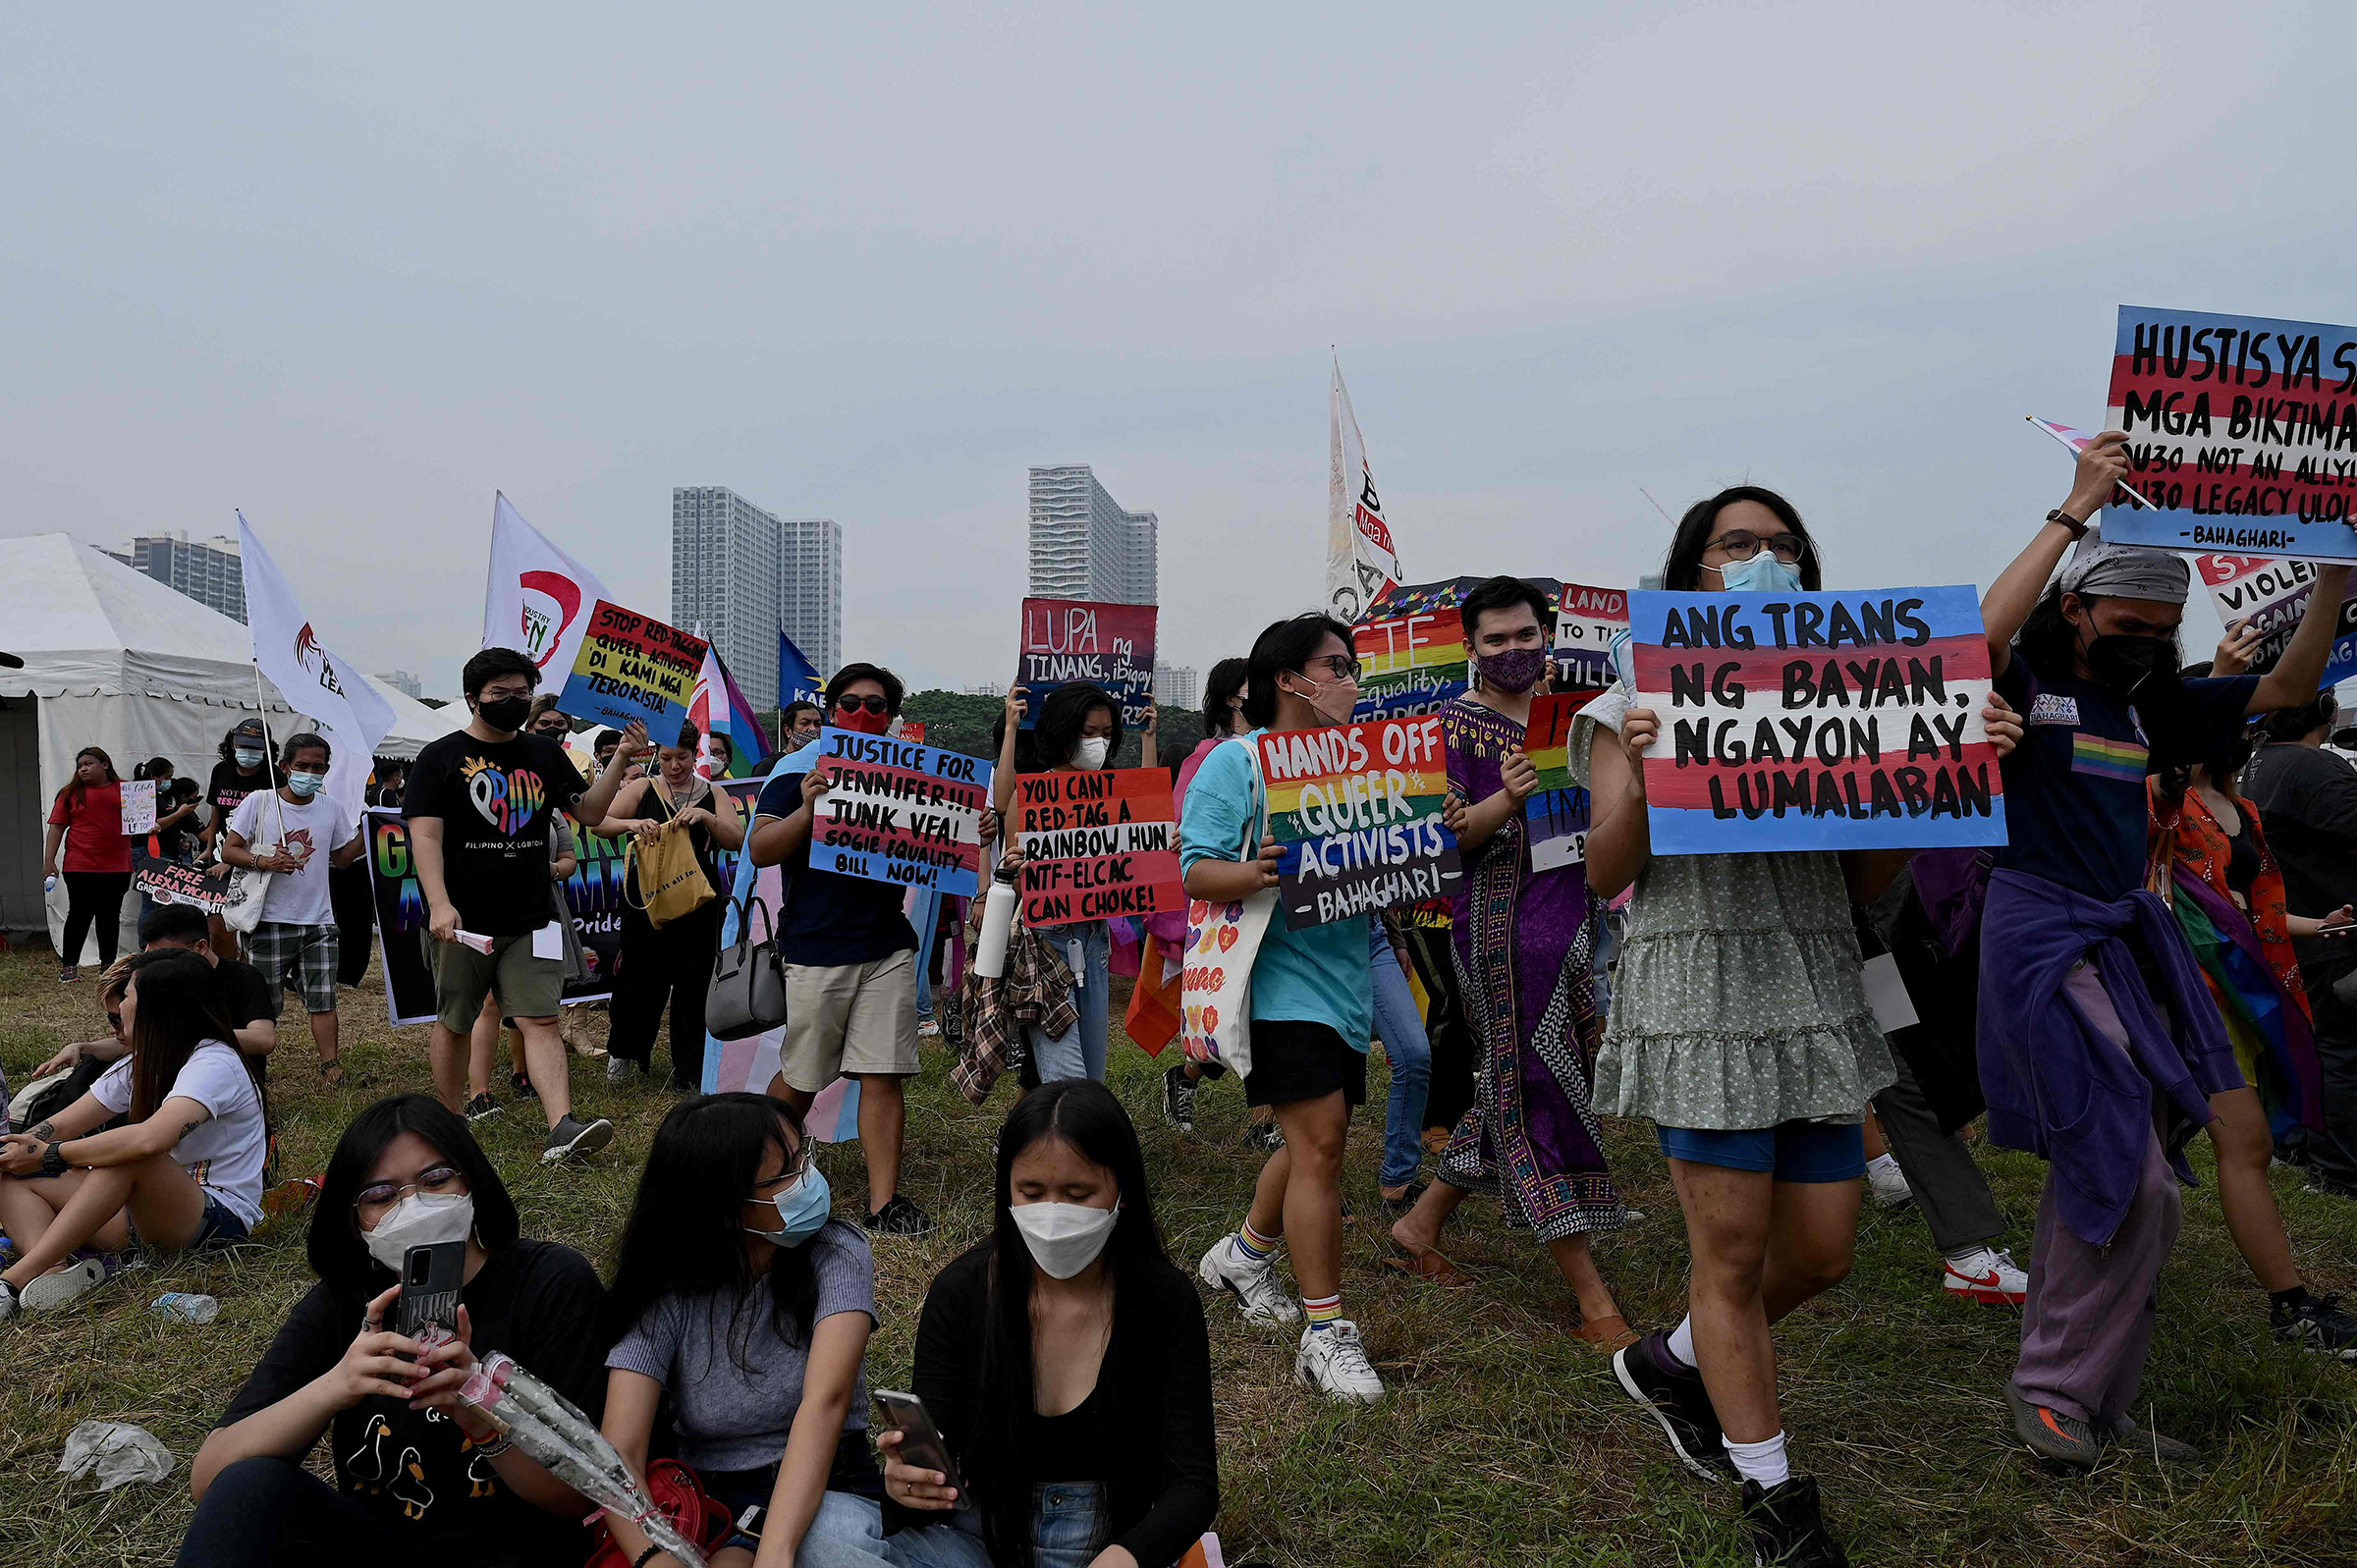 Members and supporters of the LGBT community take part in the Metro Manila Pride March in Pasay, June 25, 2022. (Jam Sta Rosa—AFP/Getty Images)